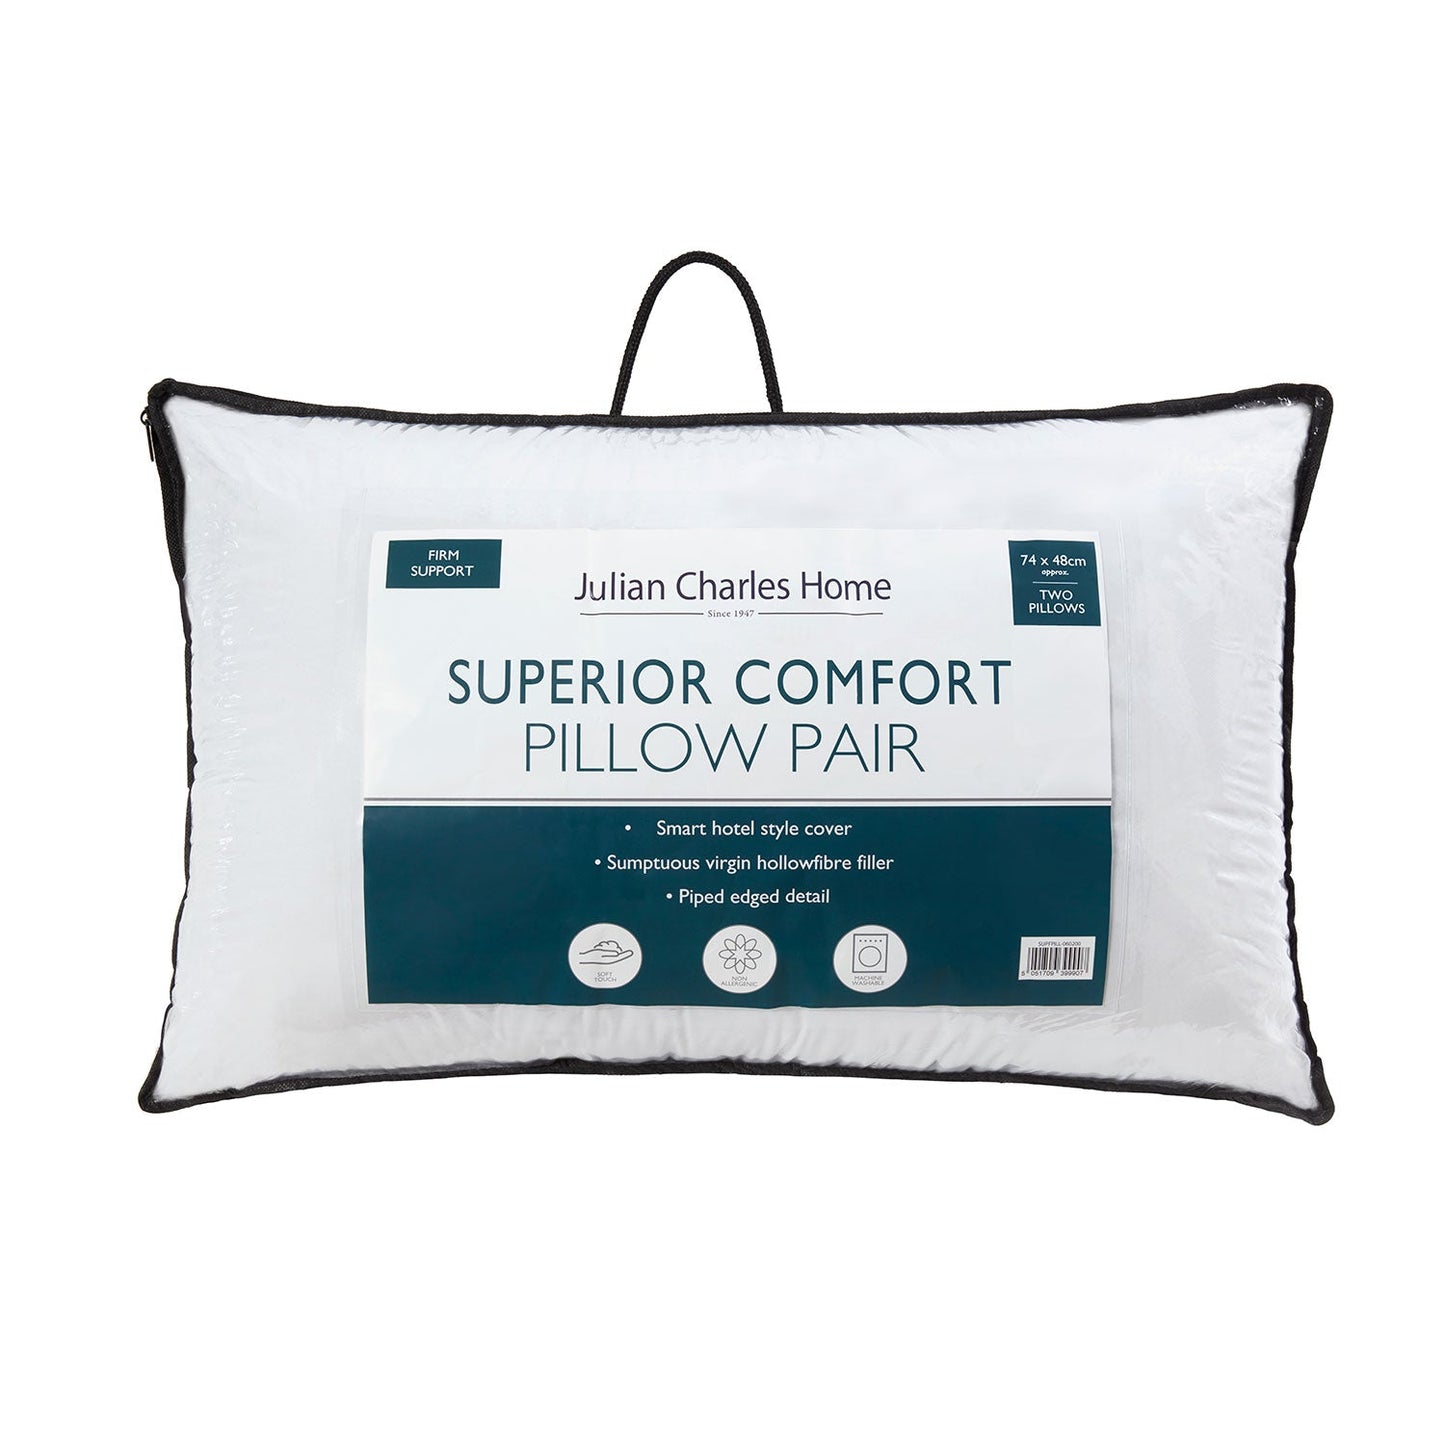 Superior Comfort Pillow Pair - Firm Support